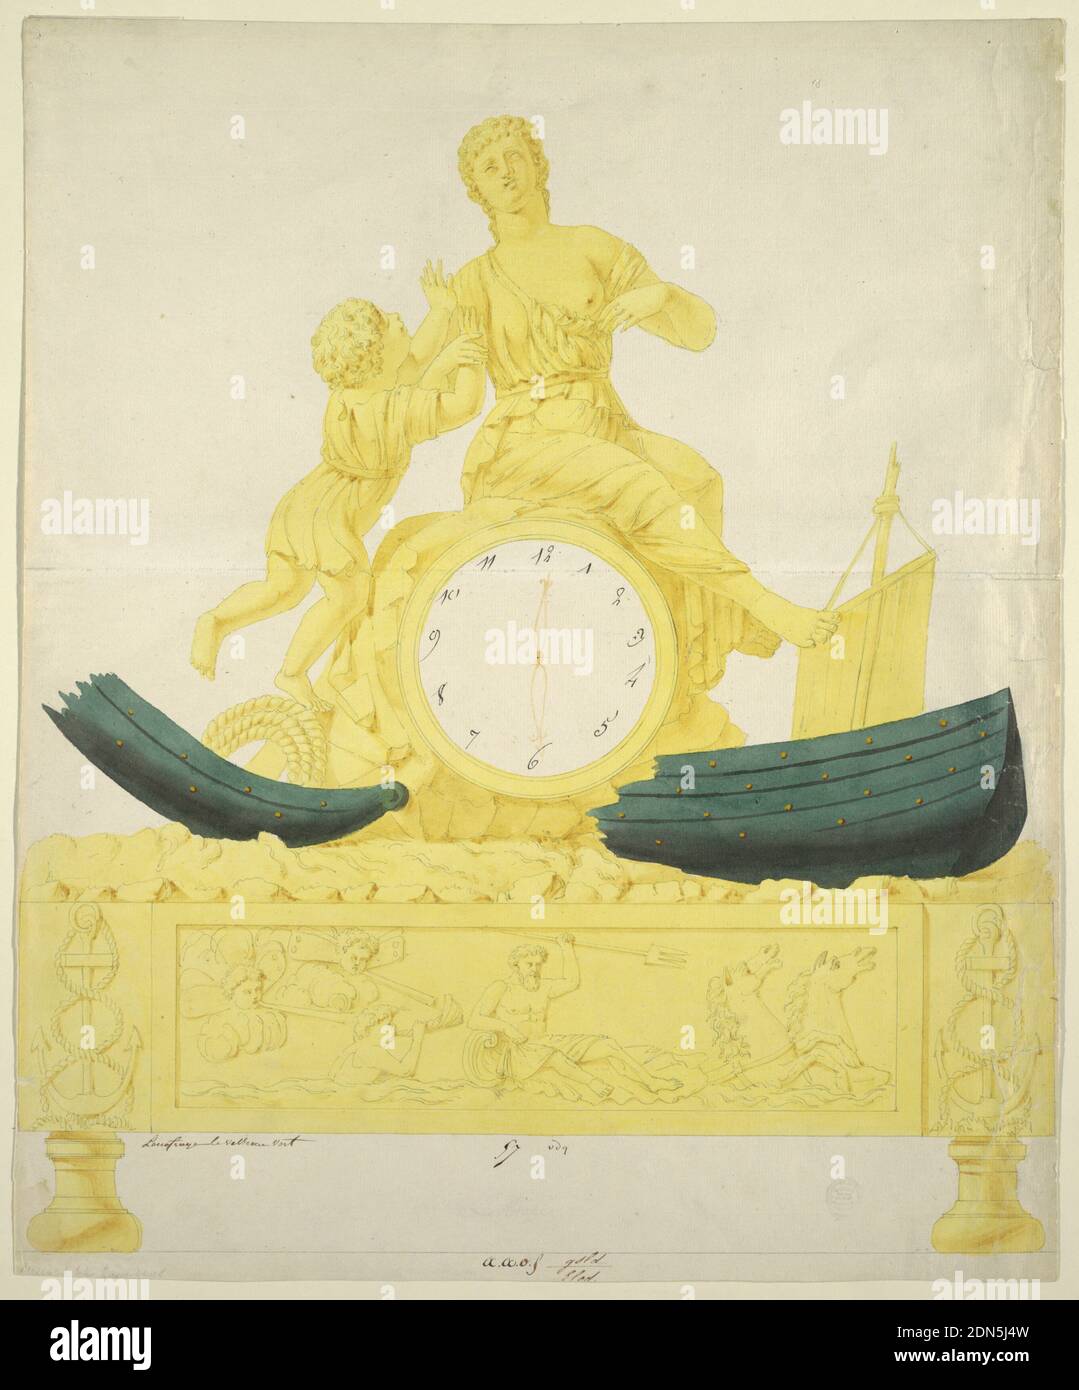 Design for a Clock, Pen and gray ink, brush and yellow, green and brown washes on off-white laid paper, Design for a gilt table clock: a child reaches towards a seated allegorical female figure (Hope?) atop a clock face (its encasing suggesting a rock). The broken, shipwrecked hull of a sailing vessel flanks the bottom of the clock which, in turn, rests on a base decorated with bas relief of Neptune (holding a trident) riding the sea accompanied by a Triton. Flanking the frieze are decorations featuring anchors entwined with rope., 1800–1825, timepieces & measuring devices, Drawing Stock Photo